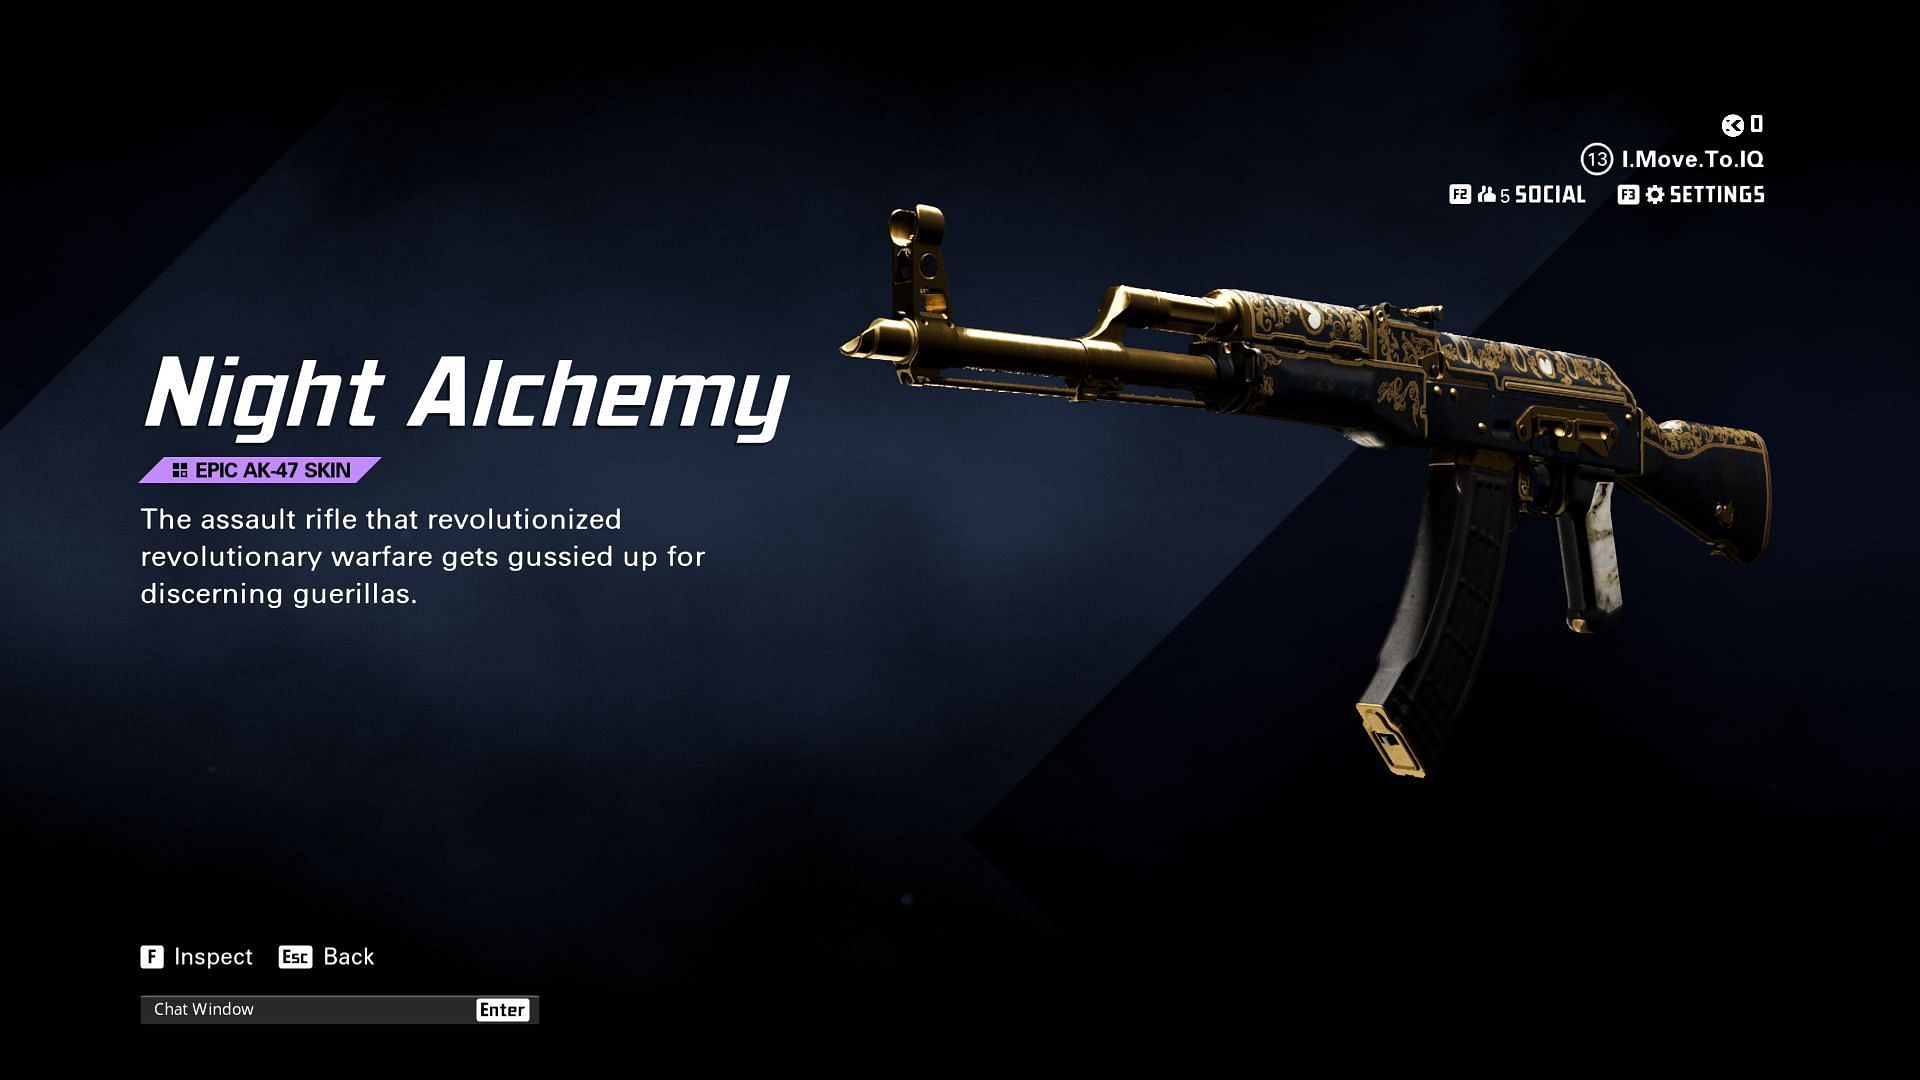 The AK-47 skin from the Night Alchemy bundle in XDefiant (Image via Ubisoft)